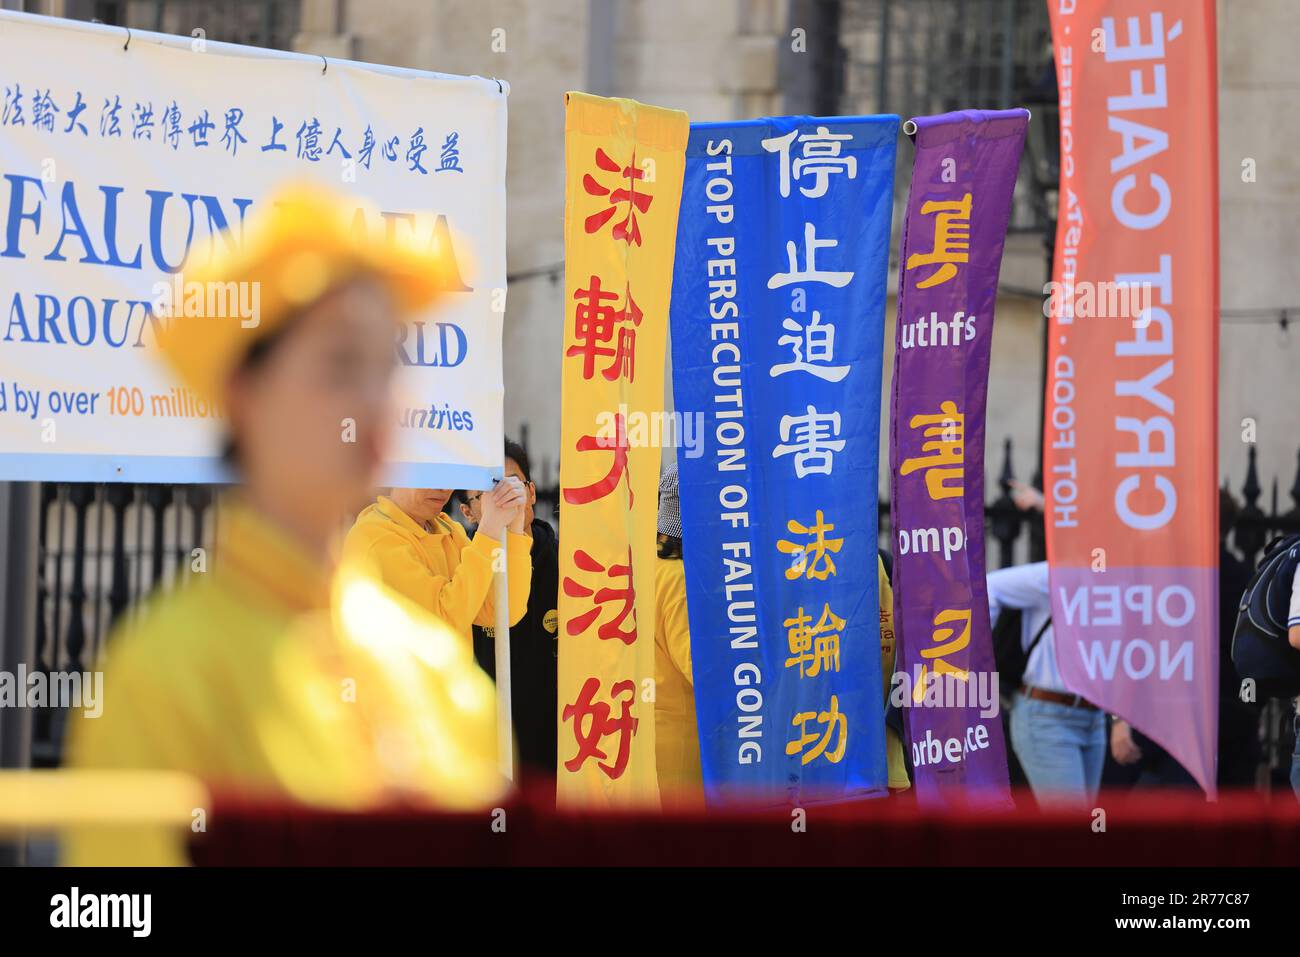 Protest by Falun Gong outside St Martin's-in-the-field, against the killing and organ harvesting by the Chinese government, in London, UK Stock Photo